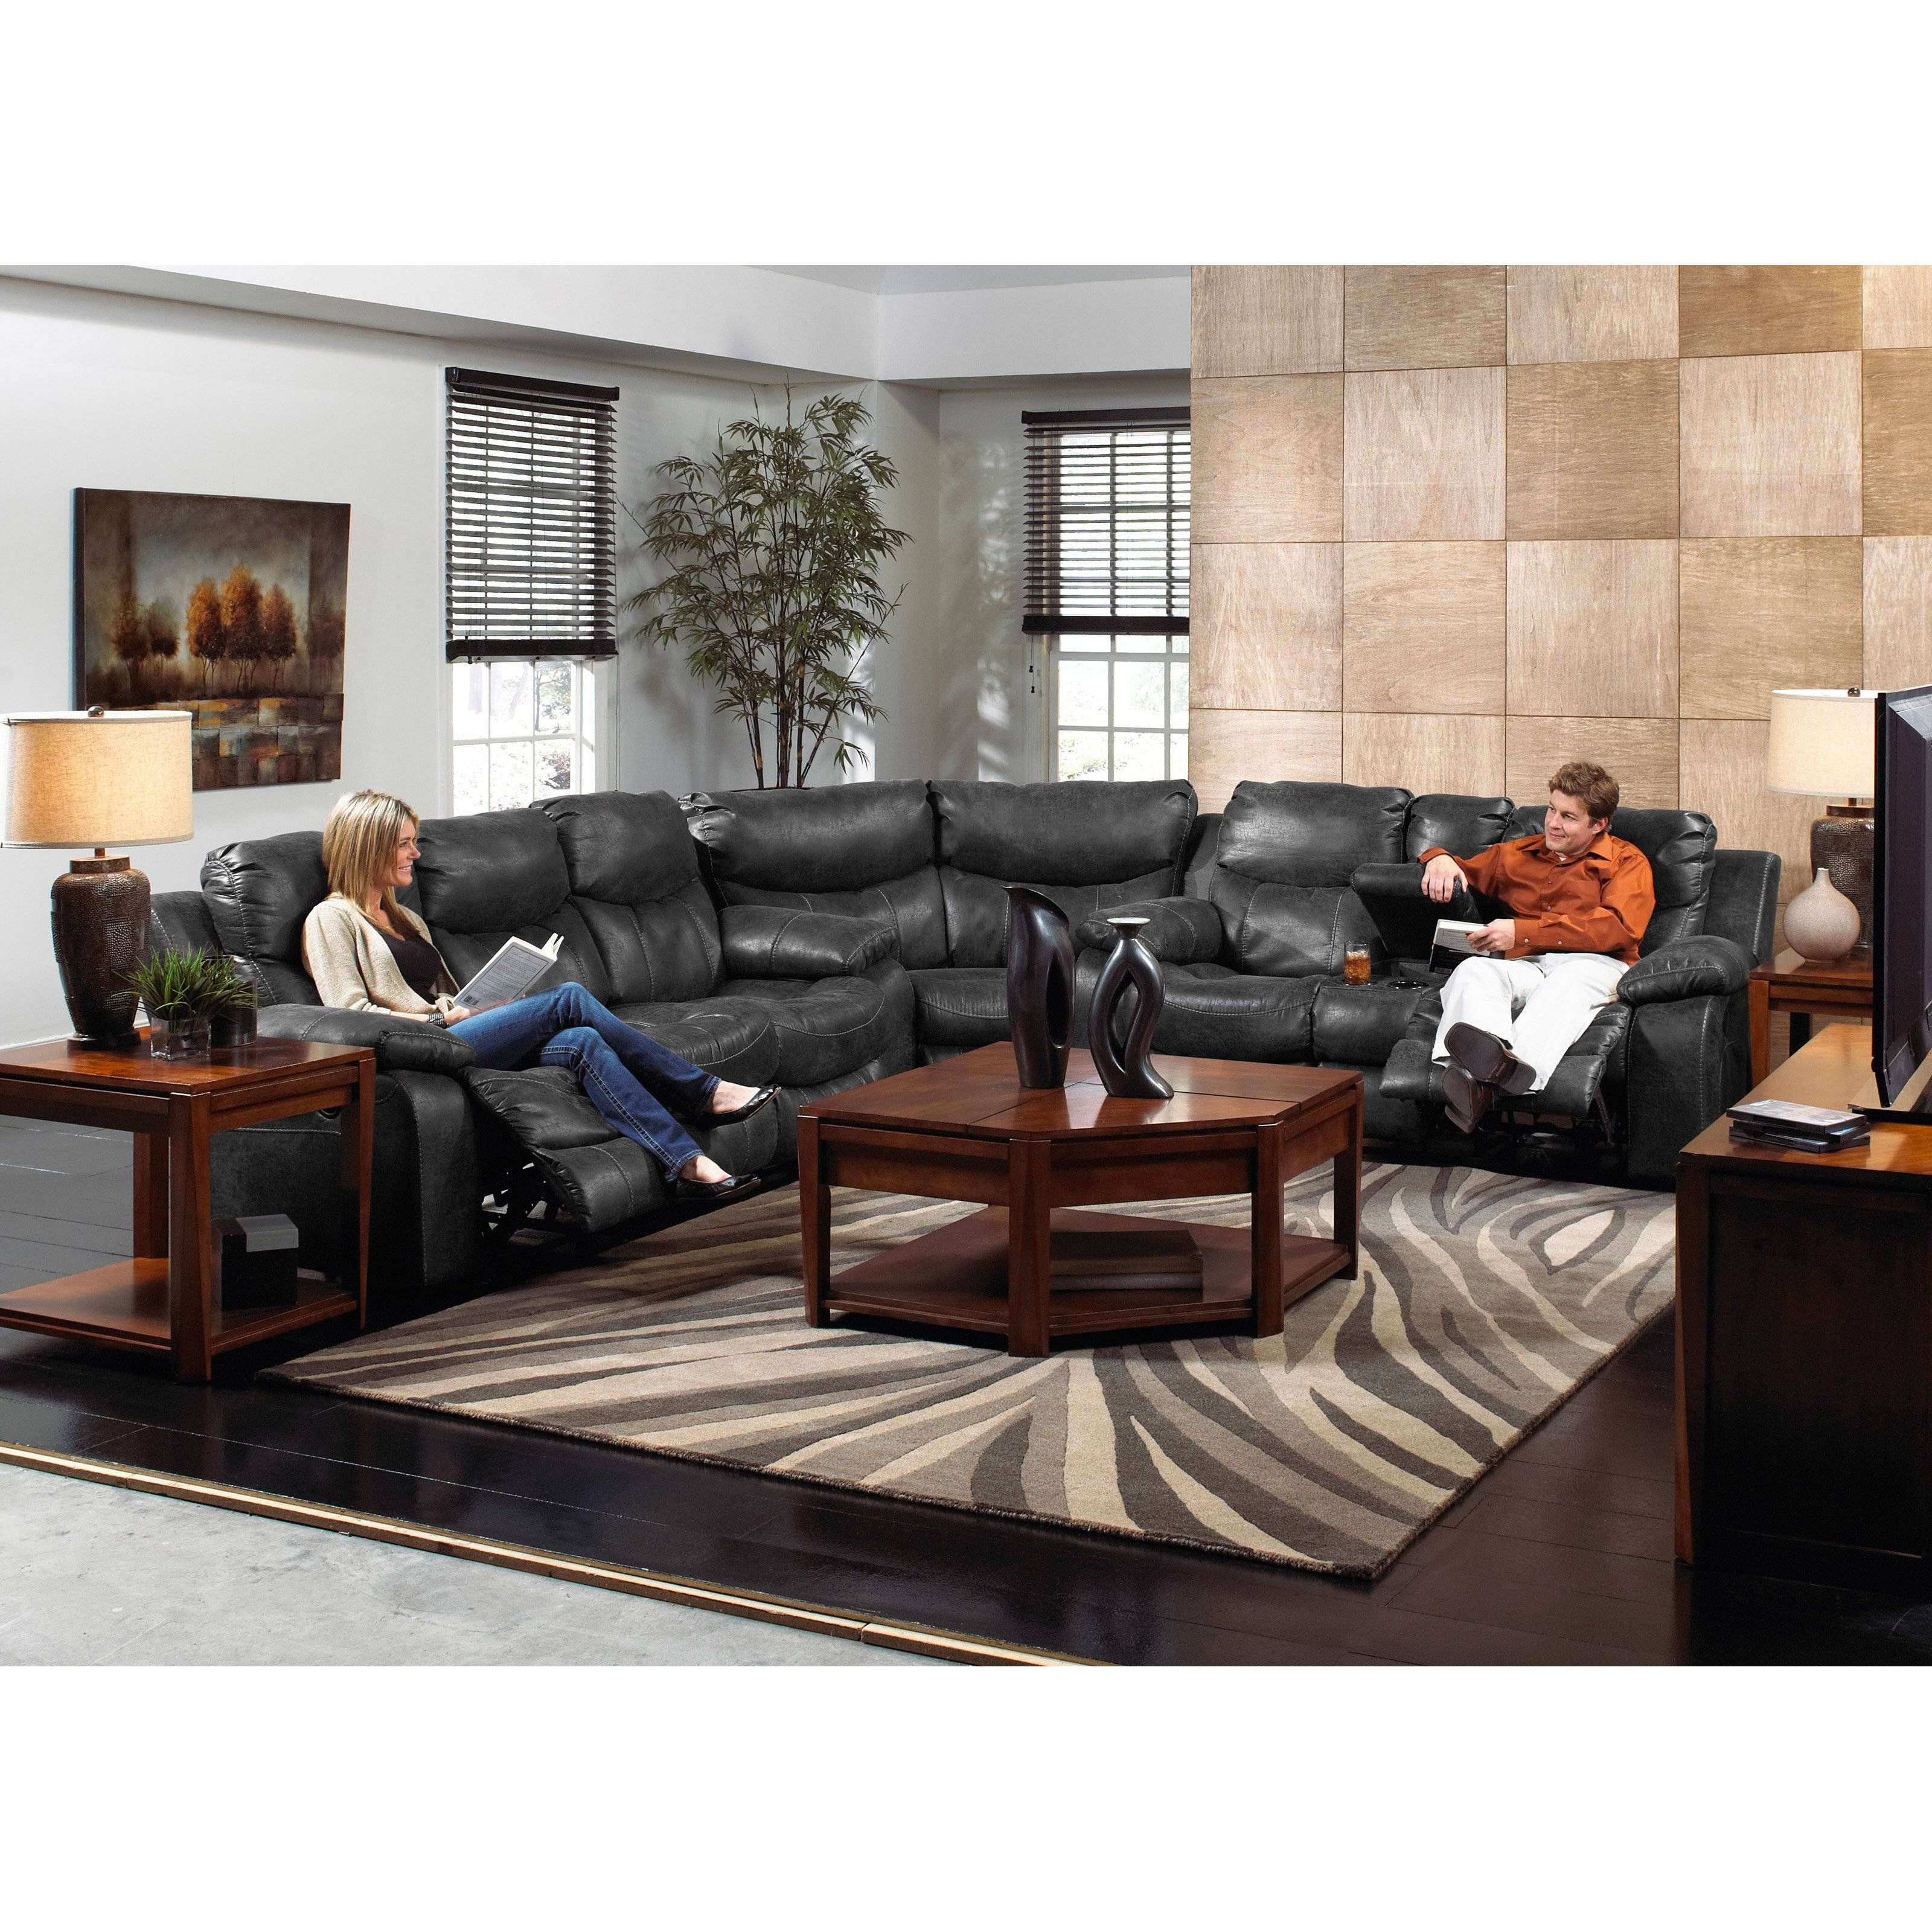 Reclining Sectional Sofas Regarding Recliner Sectional Sofas (View 30 of 30)